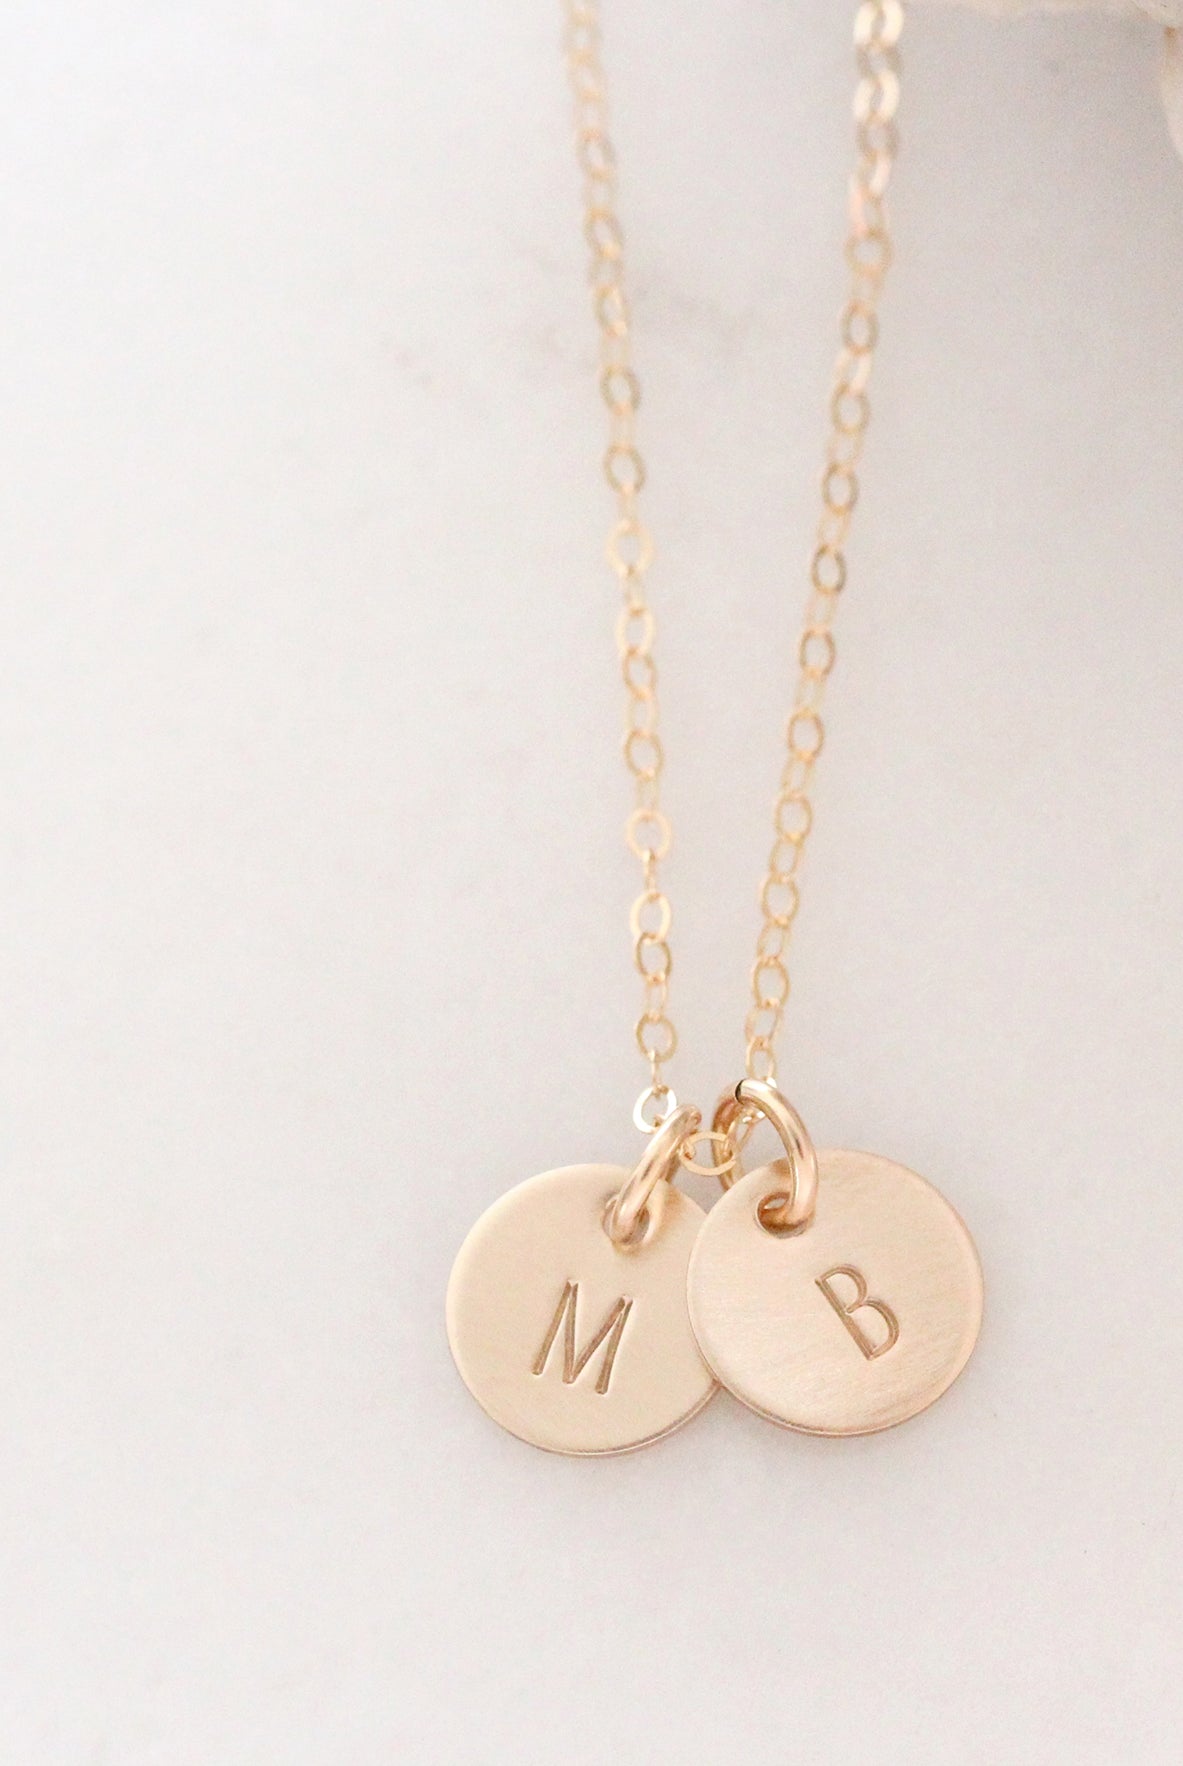 tiny gold disc necklace with initials